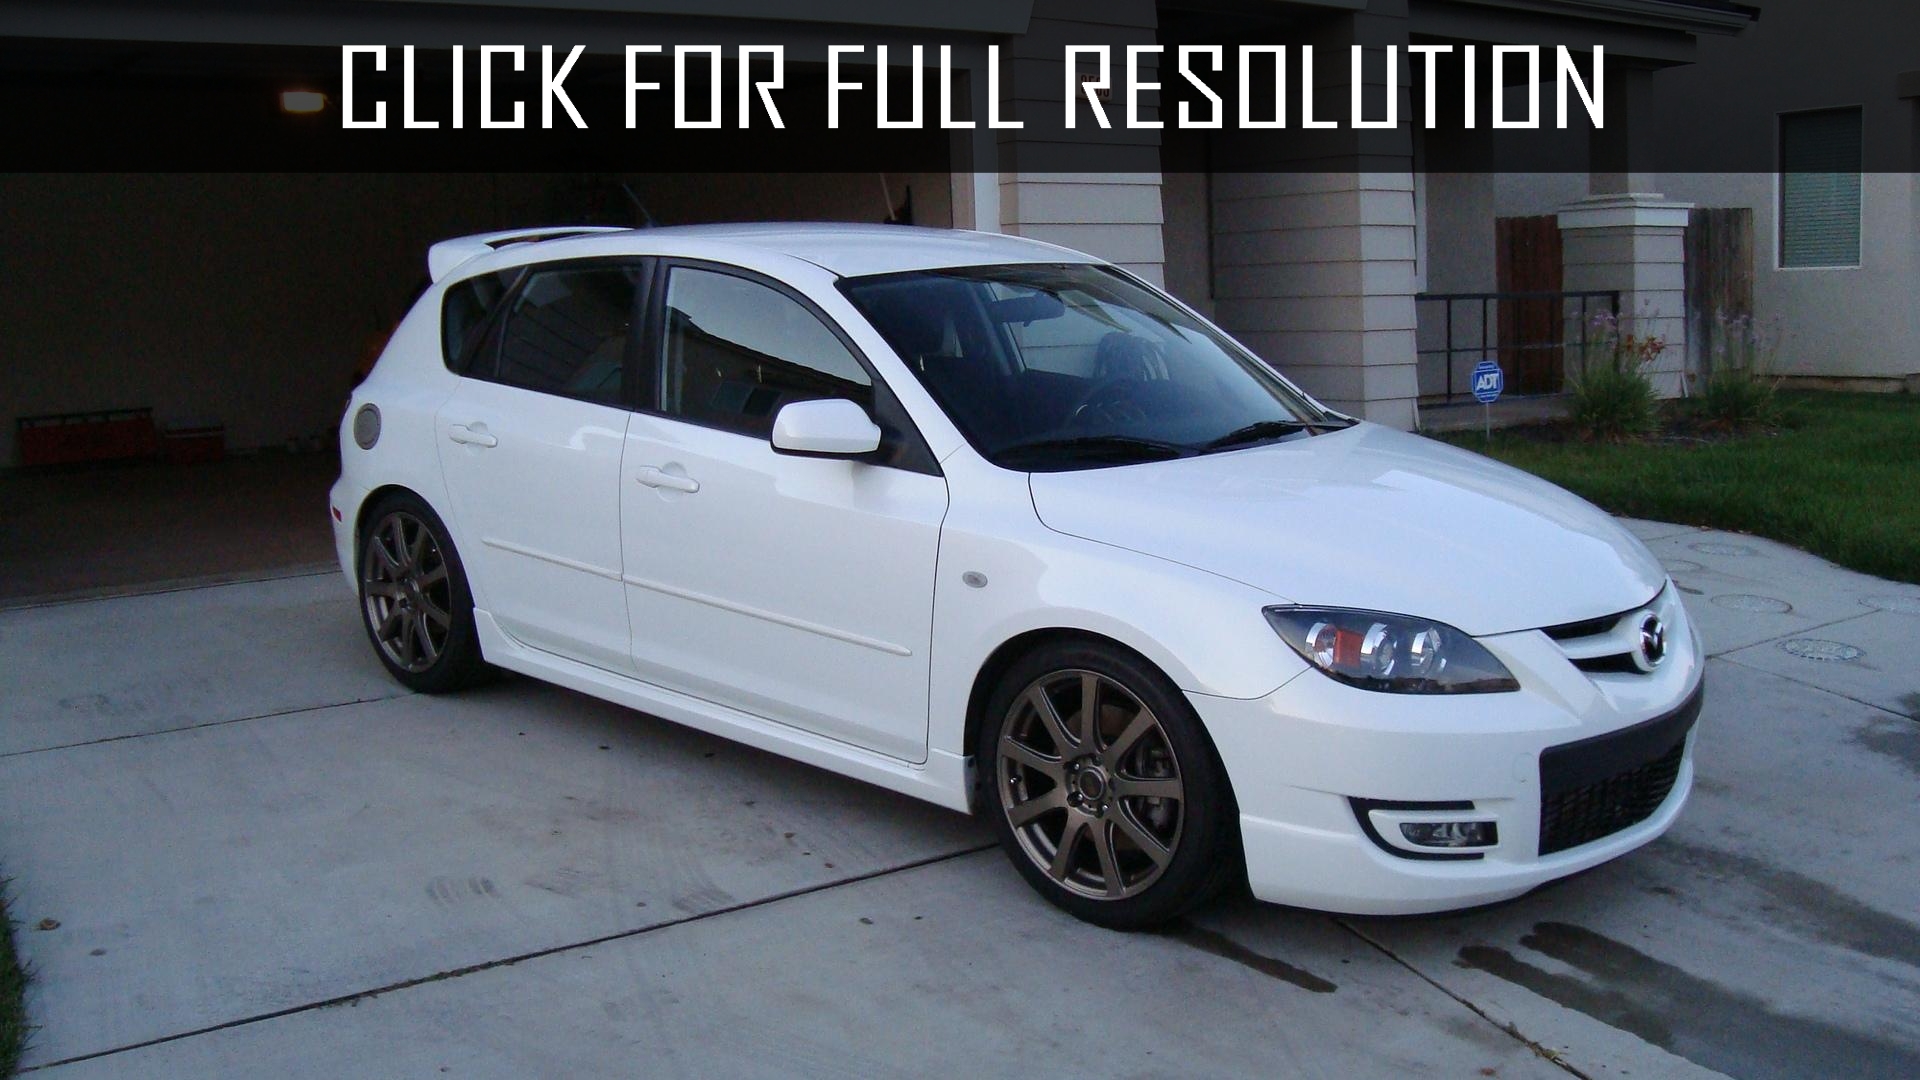 2008 Mazda 3 Hatchback news, reviews, msrp, ratings with